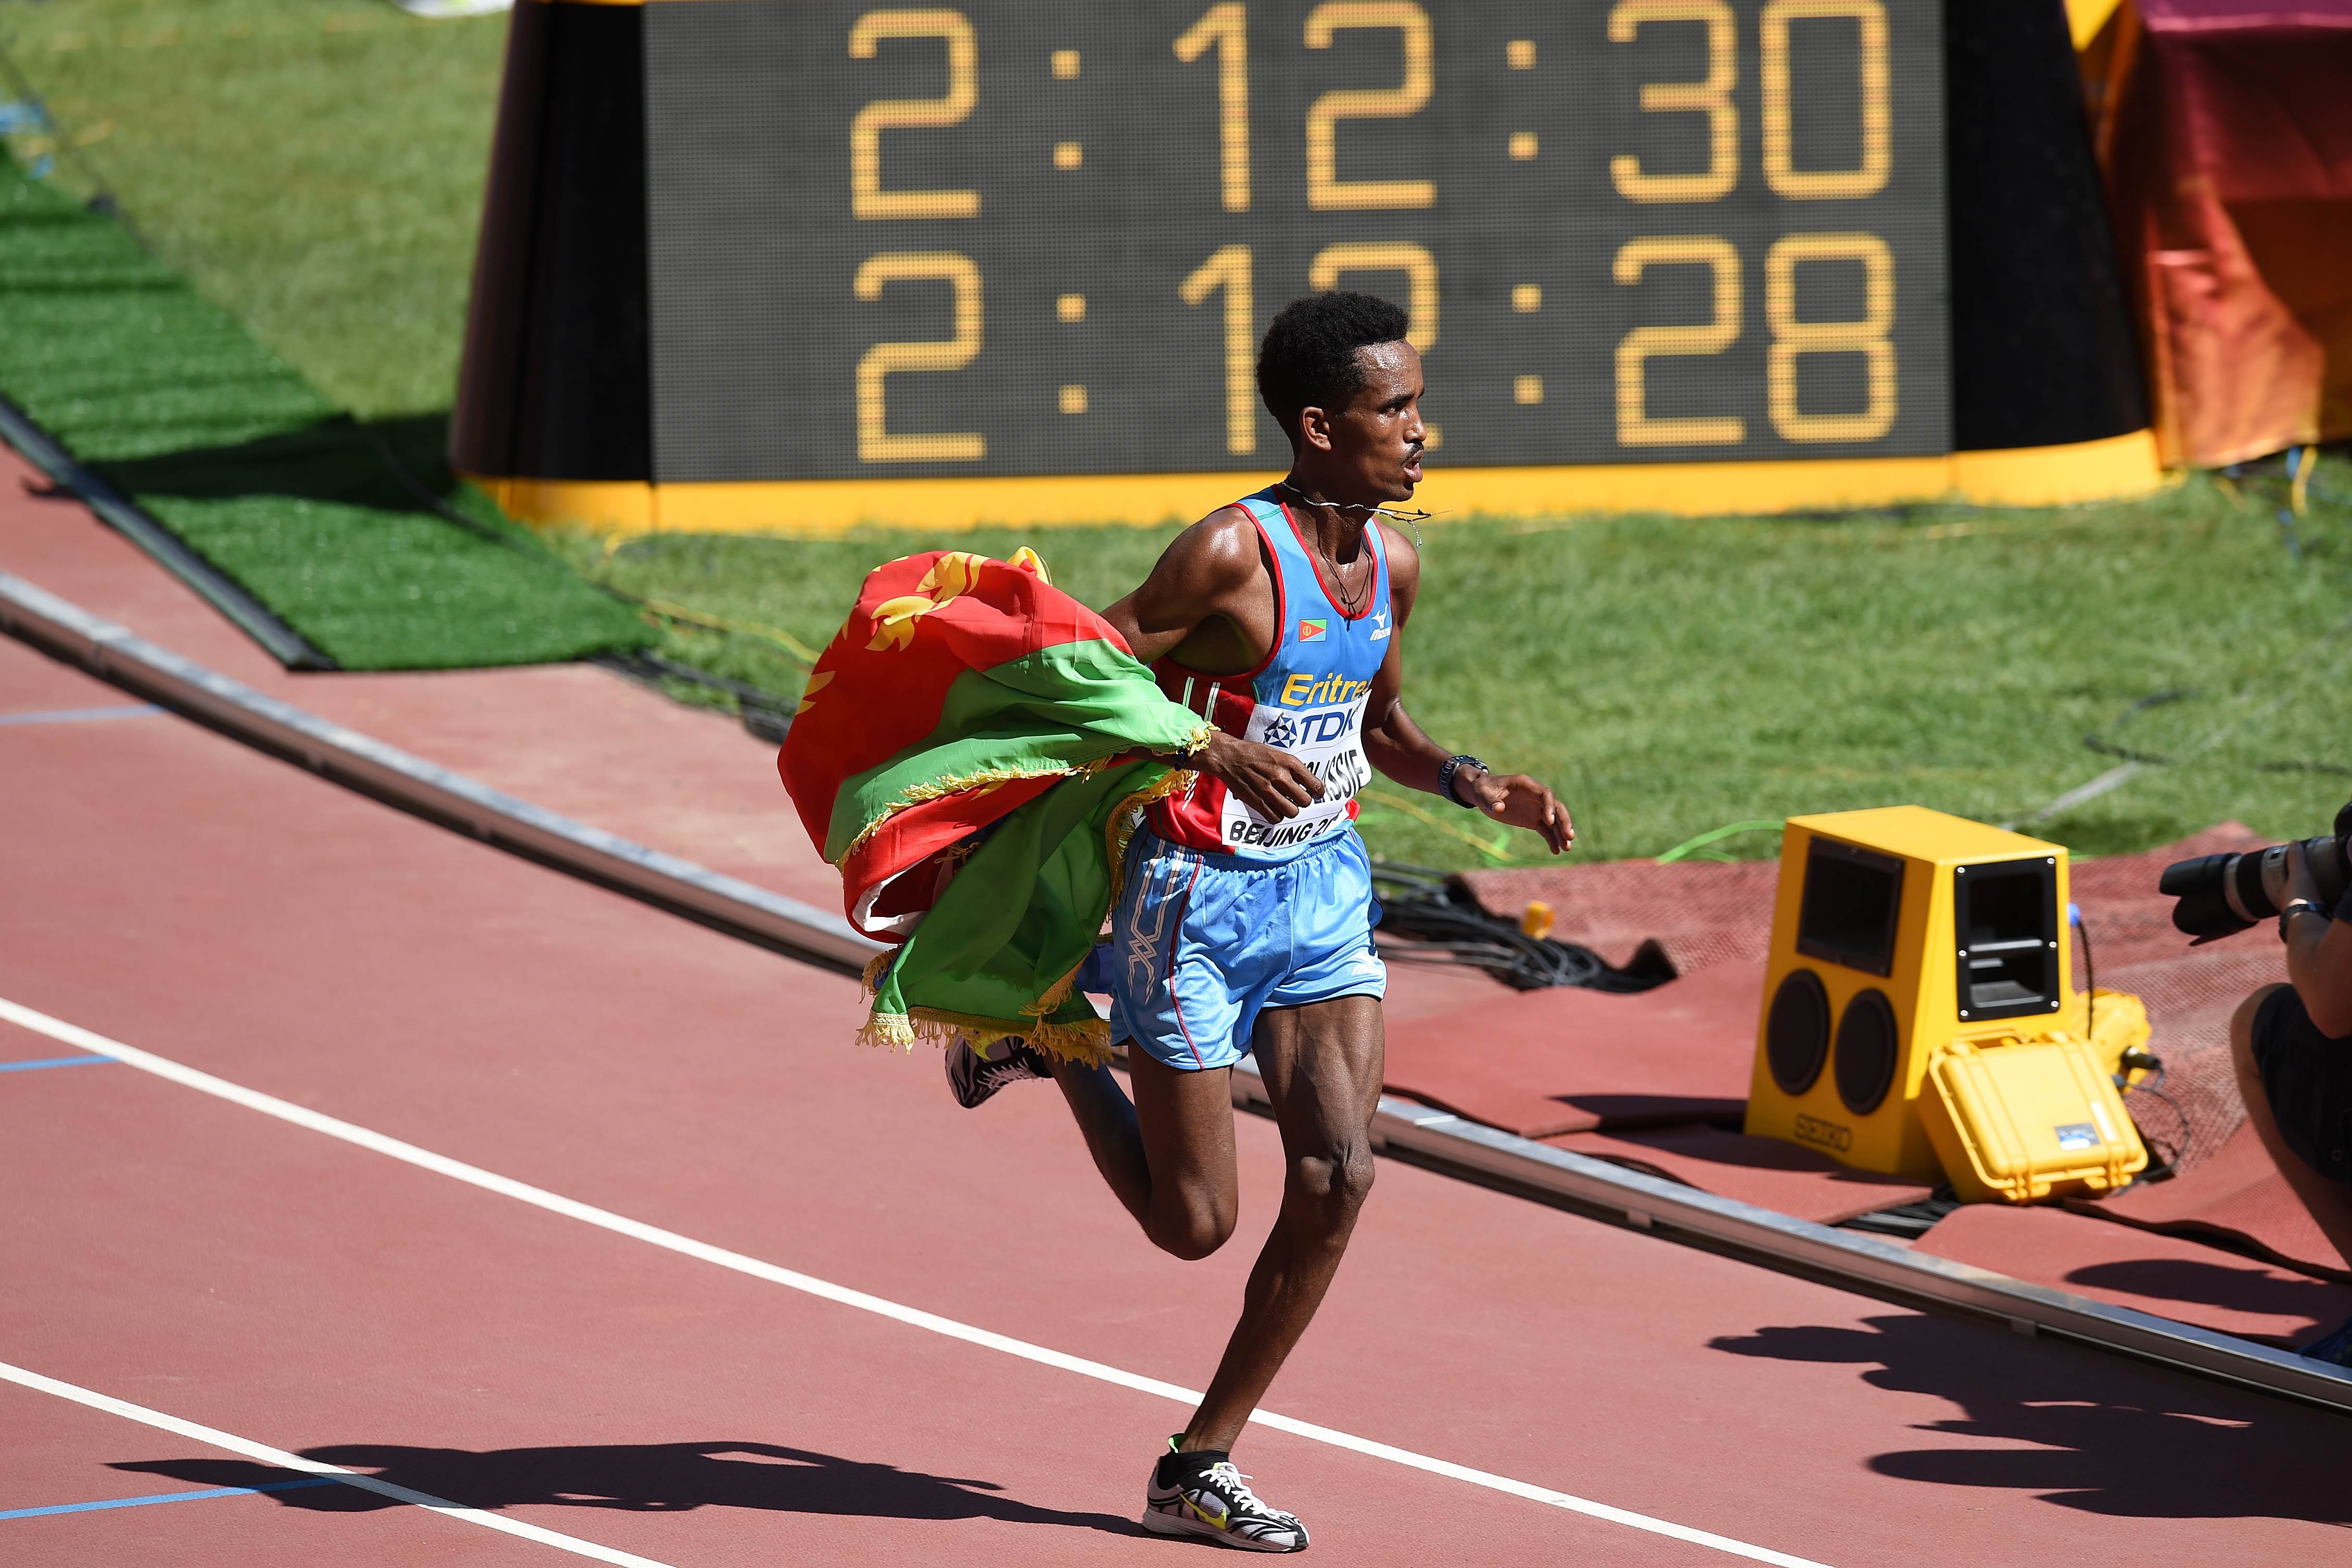 Wrapped in the Eritrean flag, Ghirmay Ghebreslassie races to victory in the men's marathon at the "Bird's Nest" National Stadium in Beijing. Photo: AFP